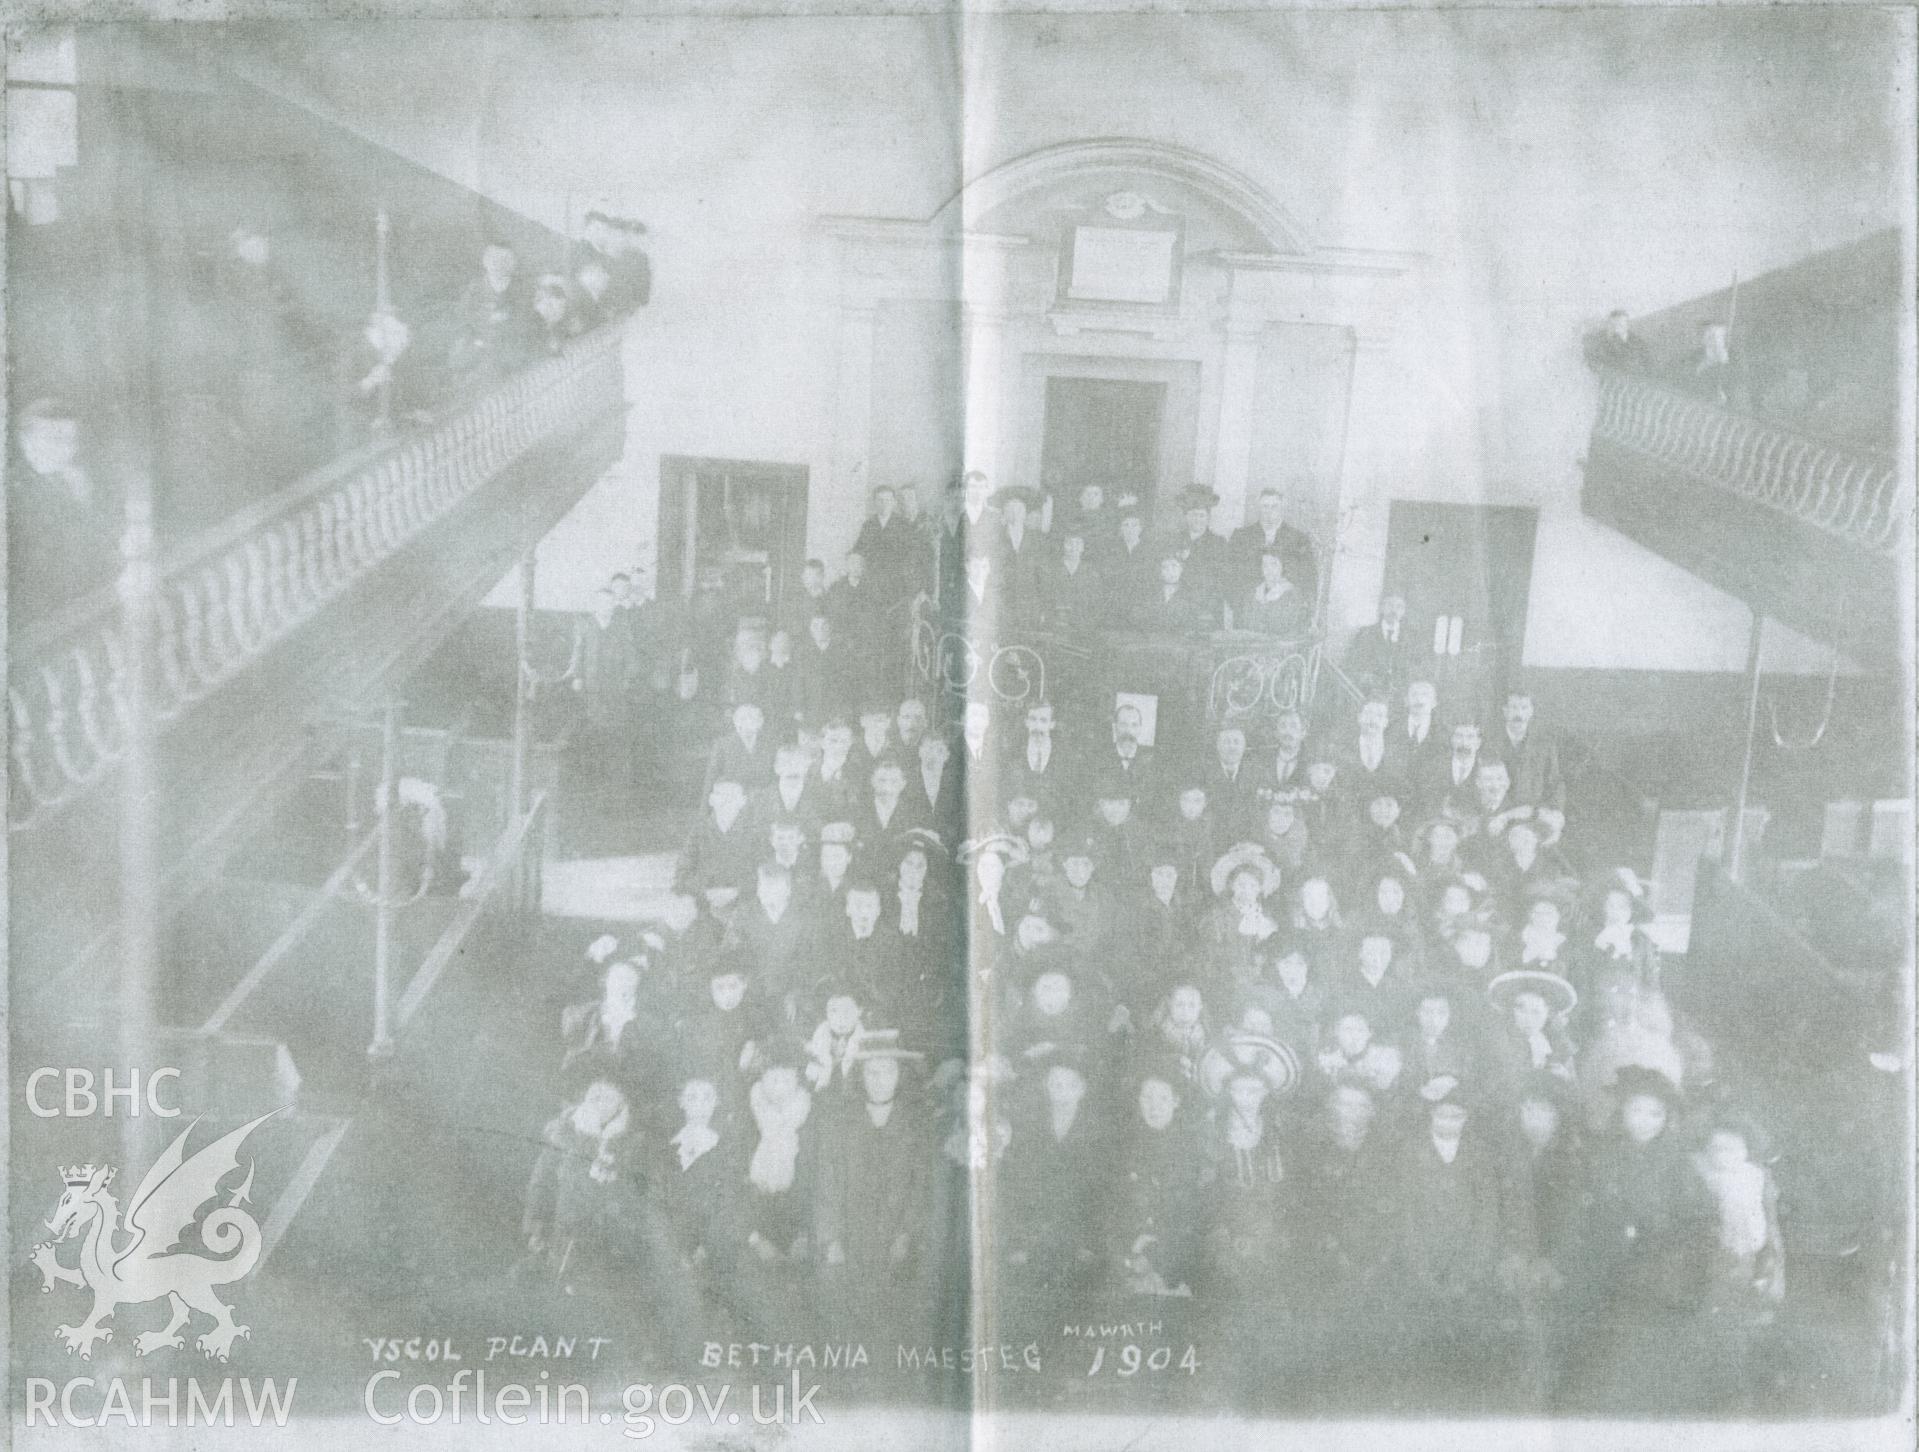 Black and white photograph of members of Ysgol Plant Bethania (Bethania Children's School), Maesteg, taken from the first floor balcony inside the chapel in March 1904. Donated to the RCAHMW by Cyril Philips as part of the Digital Dissent Project.